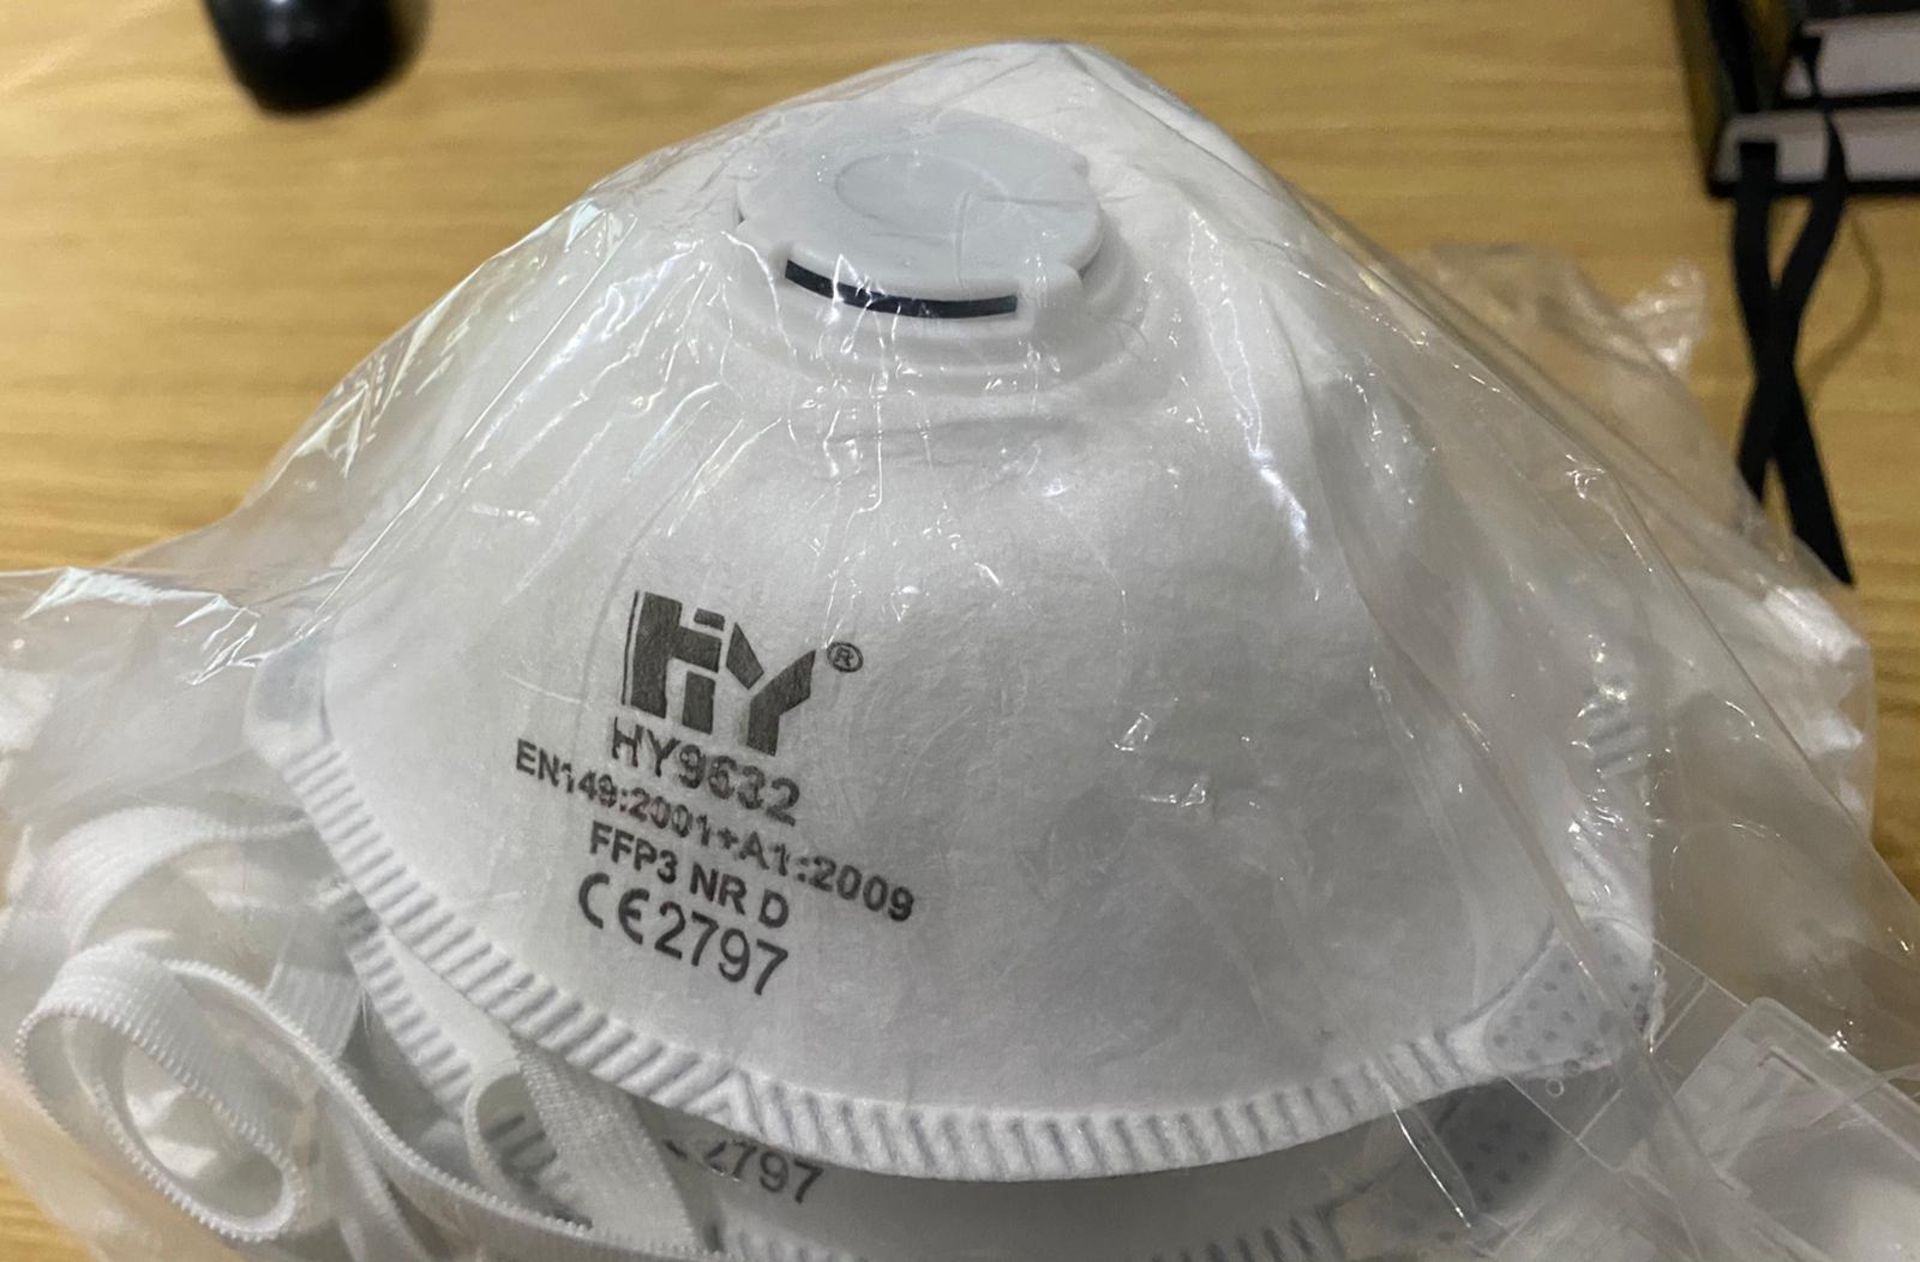 1,000 x Handanhy Fold Flat Disposable Face Masks With Exhalation Valves - Type HY8232 FFP3 - PPE - Image 3 of 5